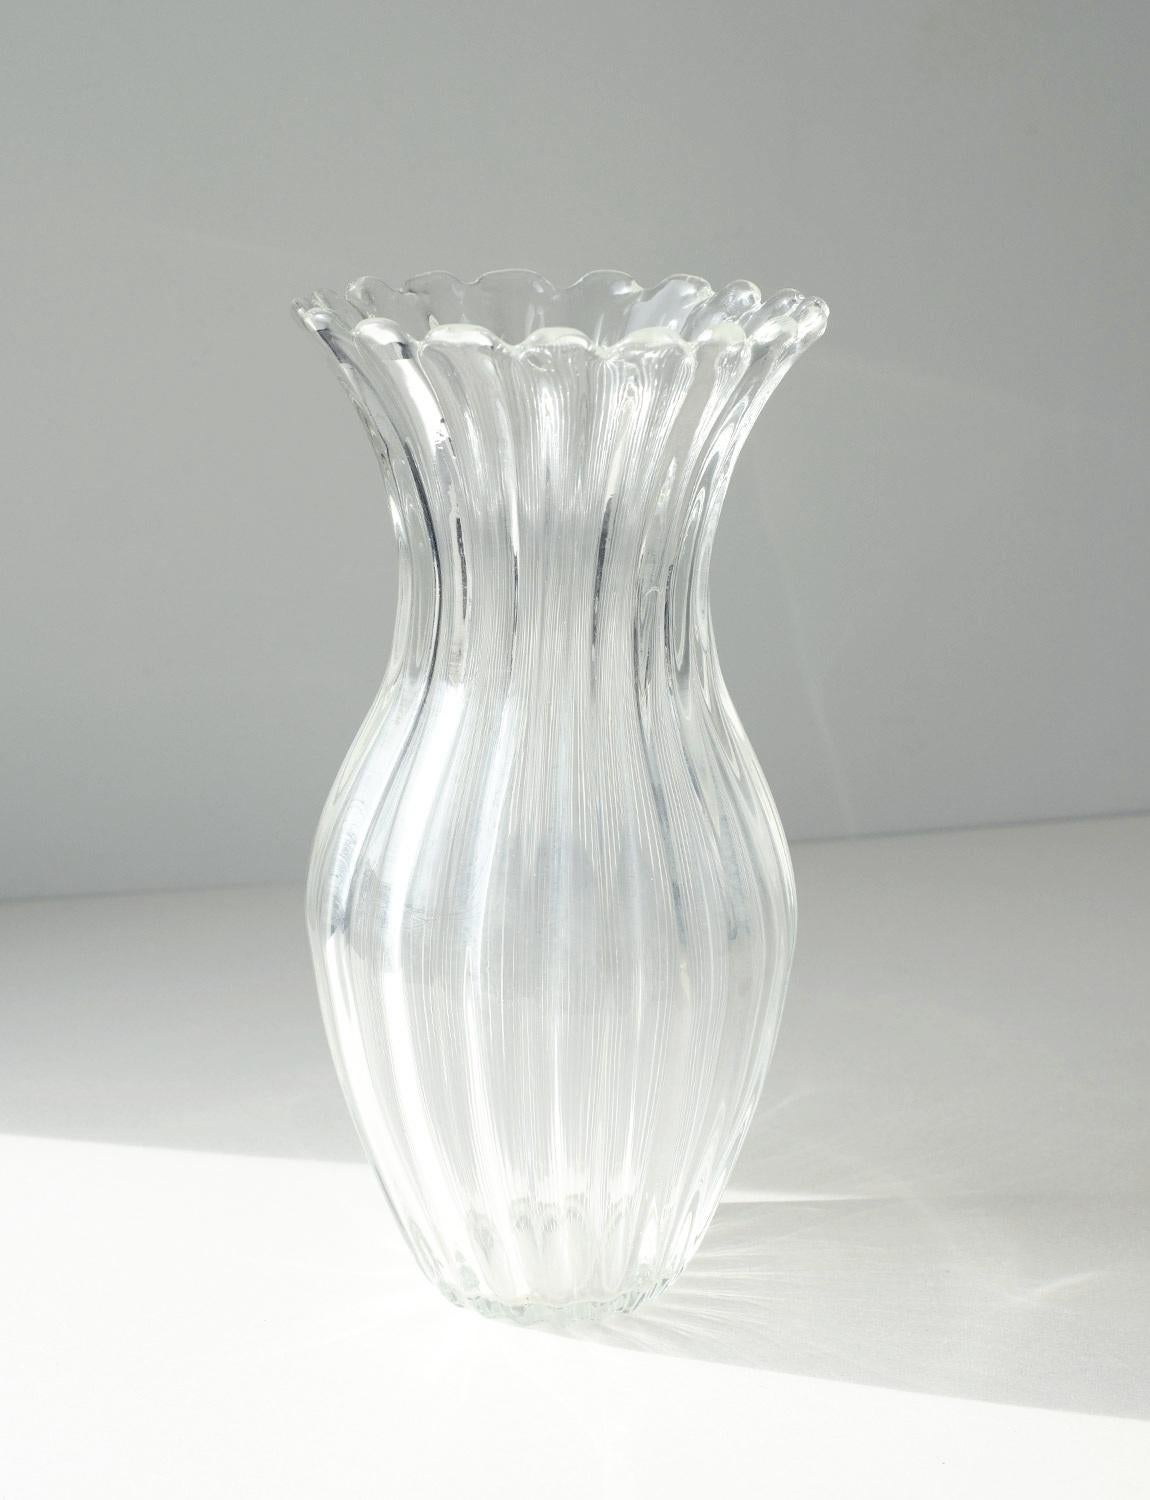 A hand-blown transparent glass Murano glass vase in the style of Barovier. It has a wonderful petal-like opening at the top, reflects the light beautifully and is in super condition considering its age.